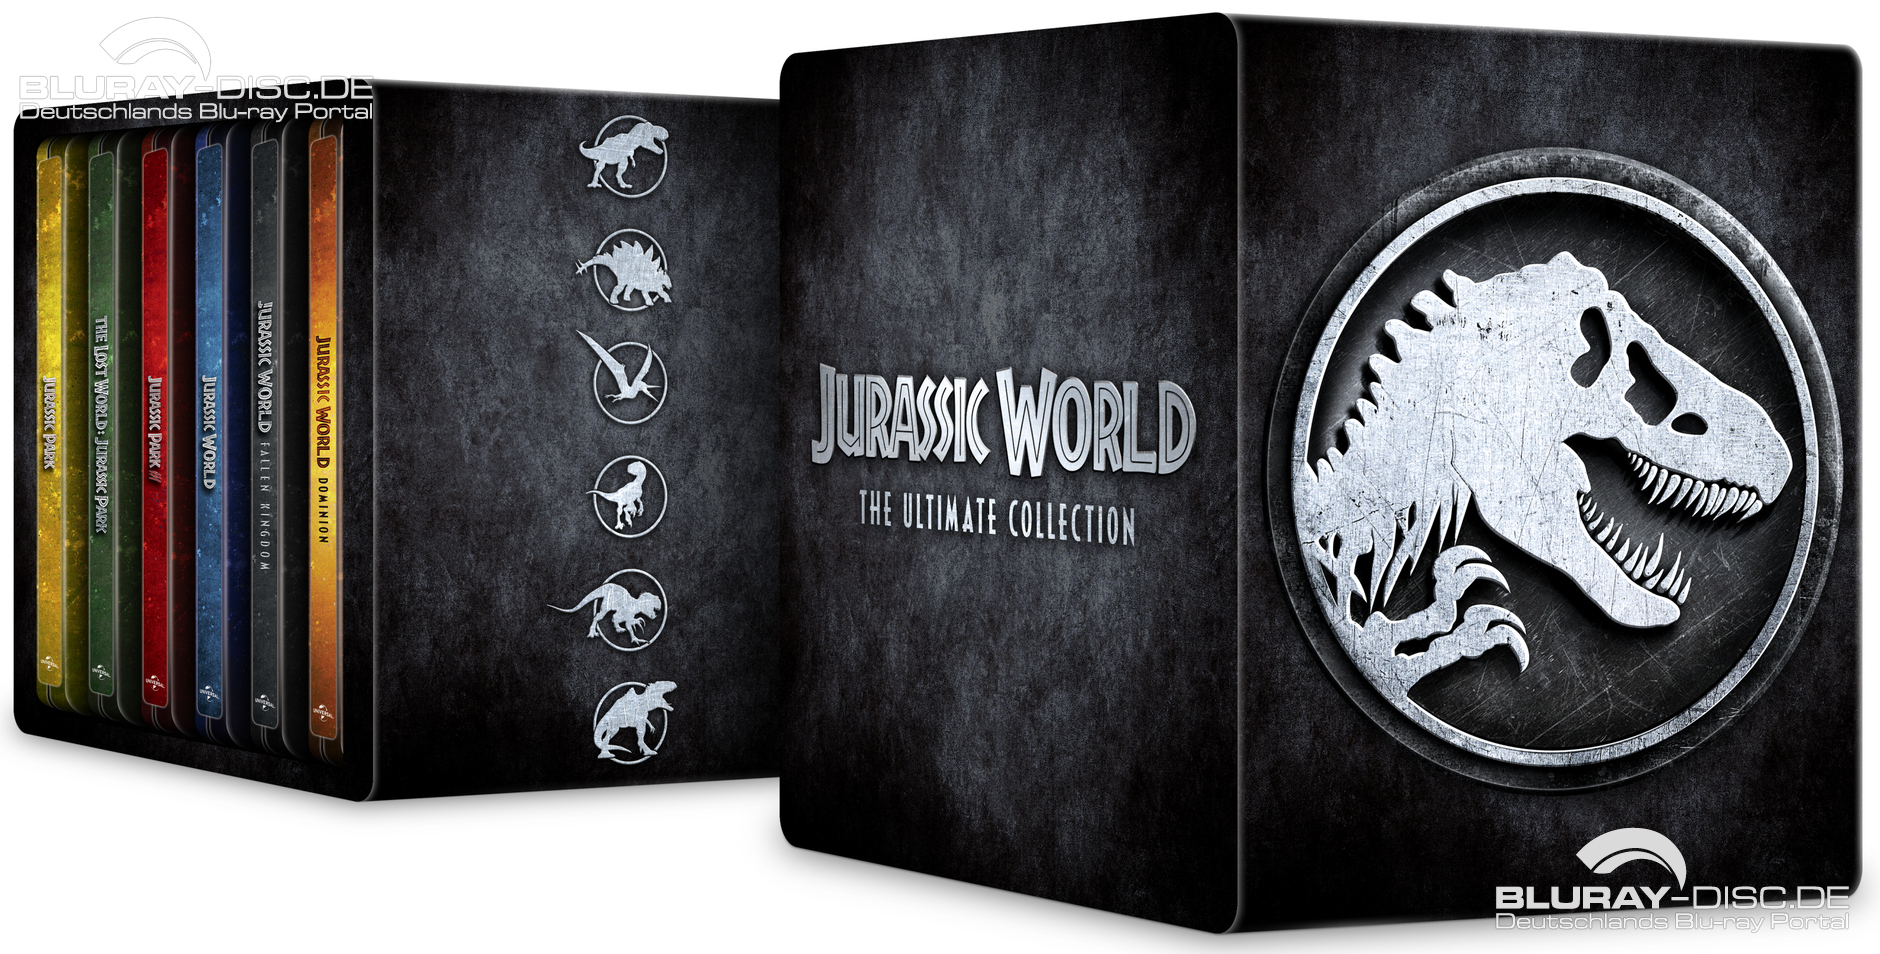 Jurassic-World-The-Ultimate-Collection-Galerie.jpg